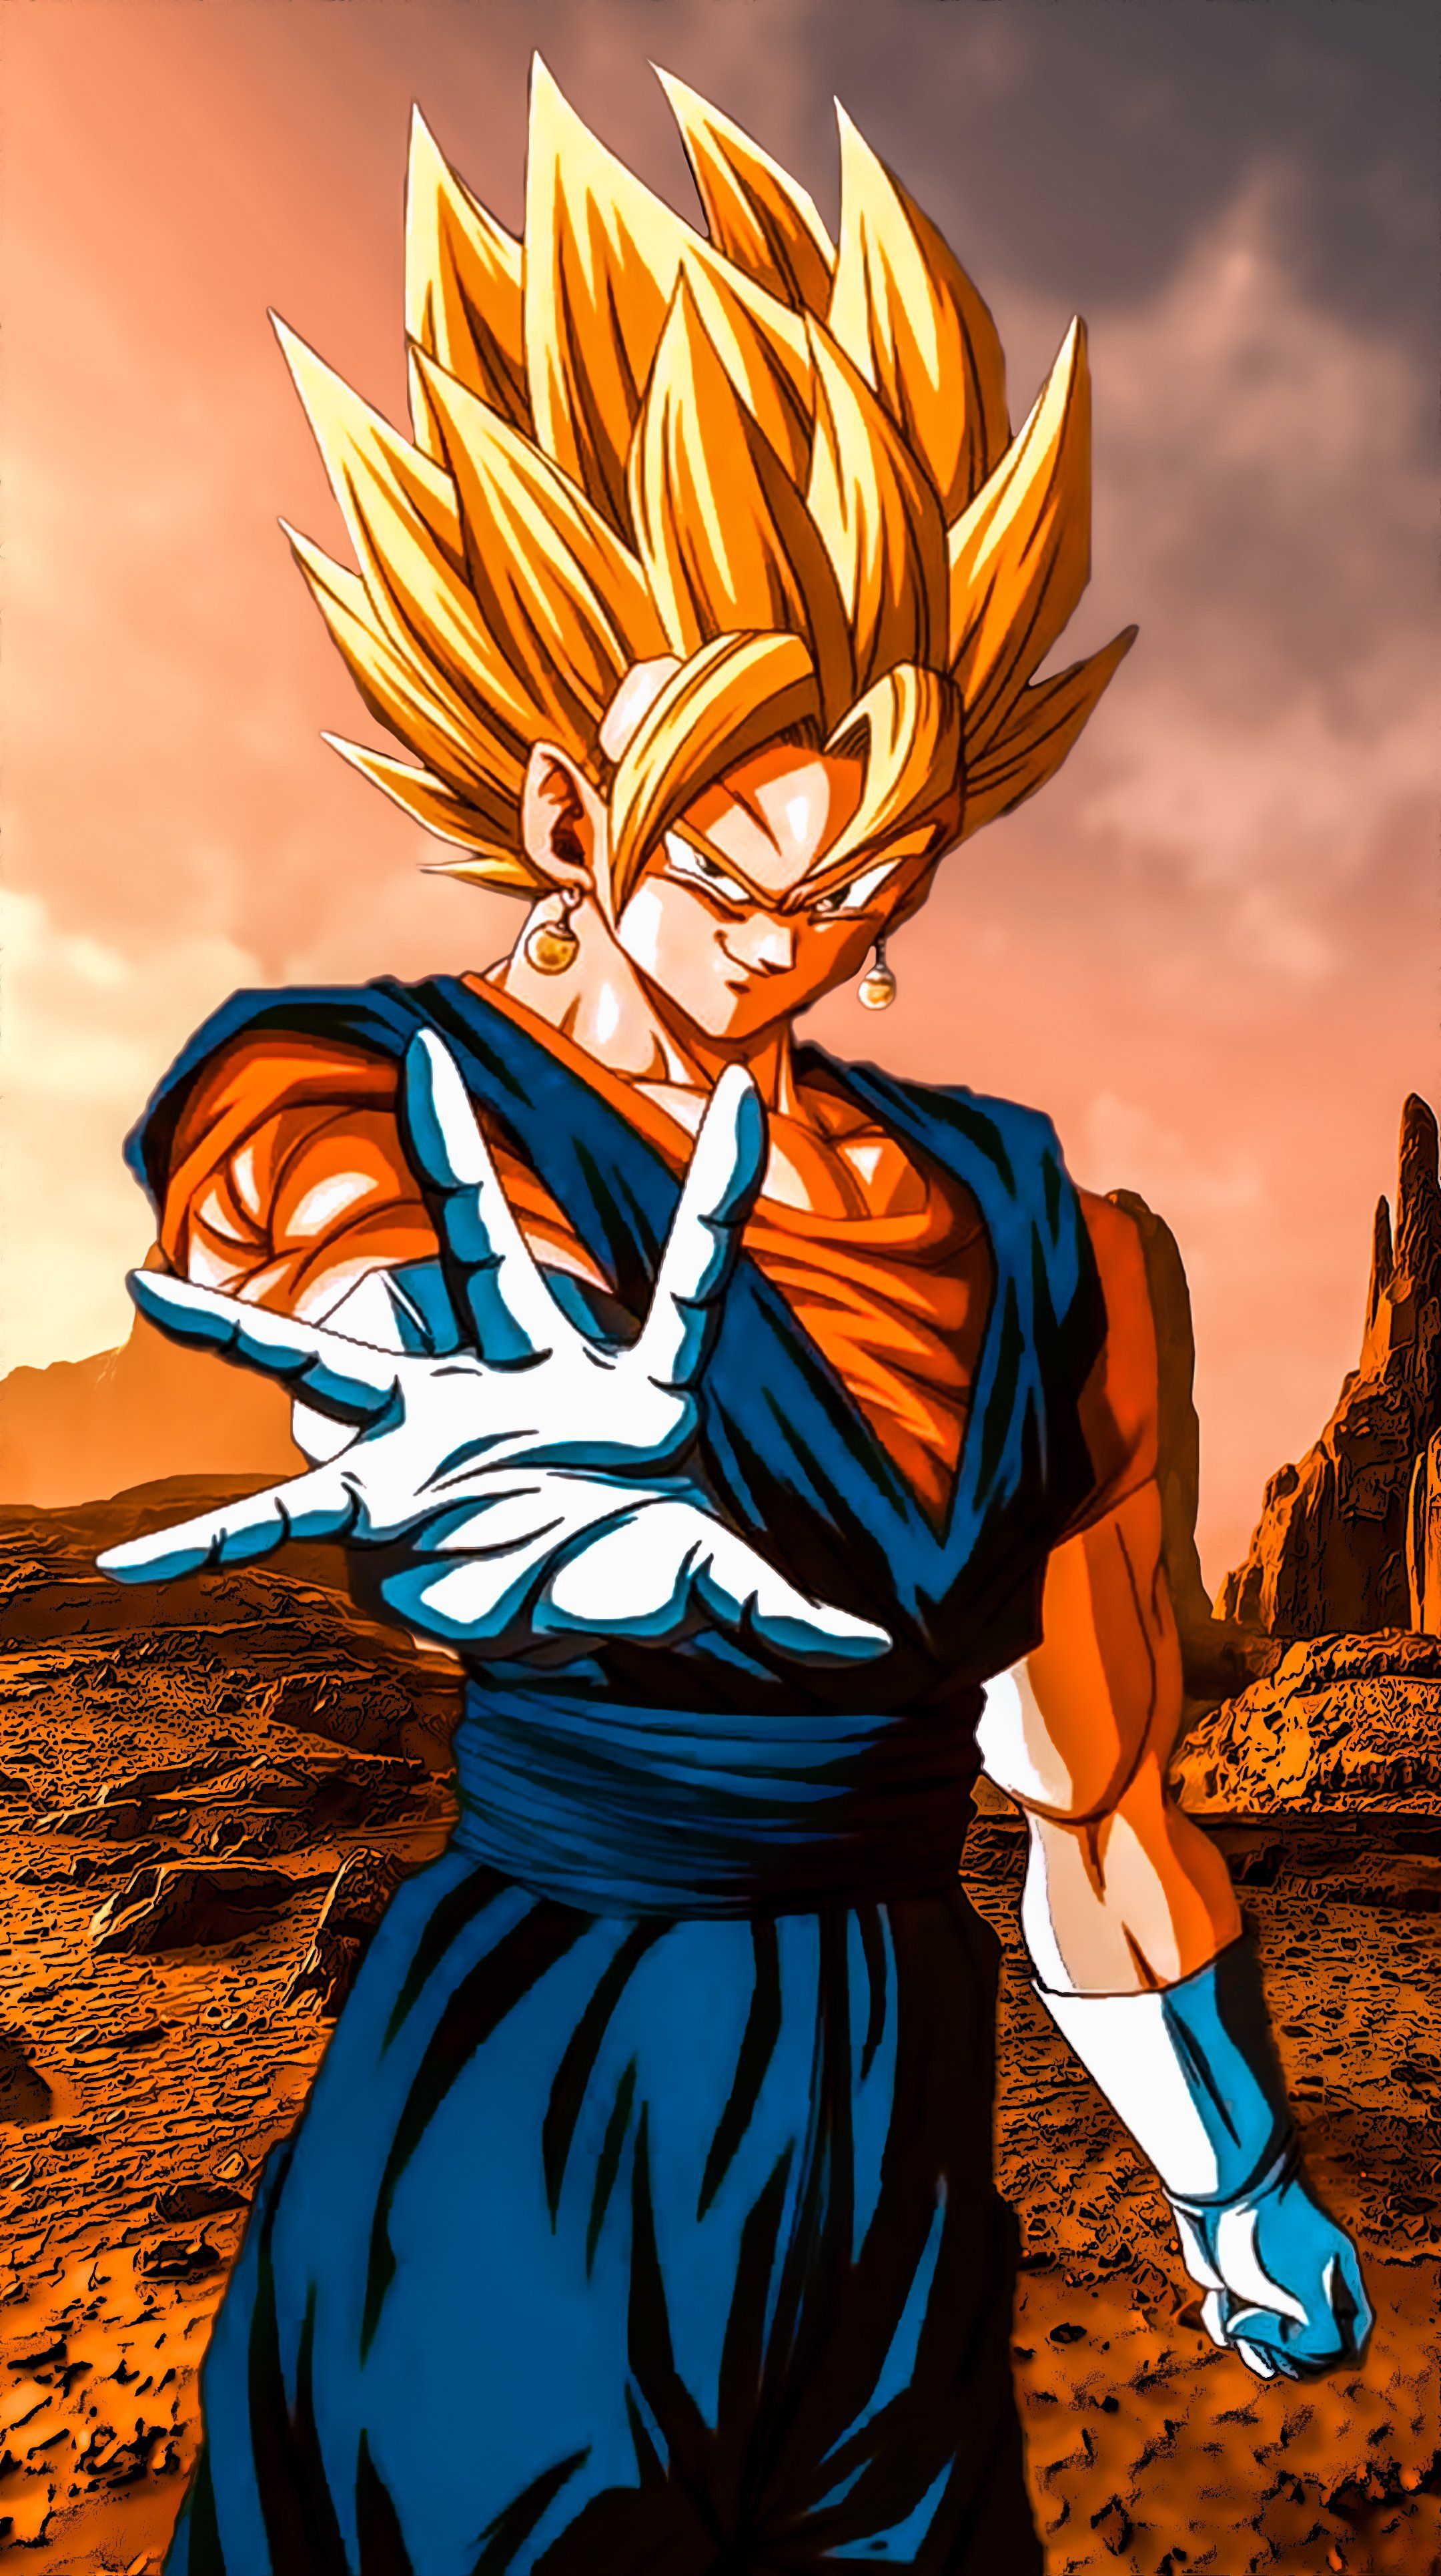 20 4K Wallpapers of DBZ and Super for Phones – SyanArt Station